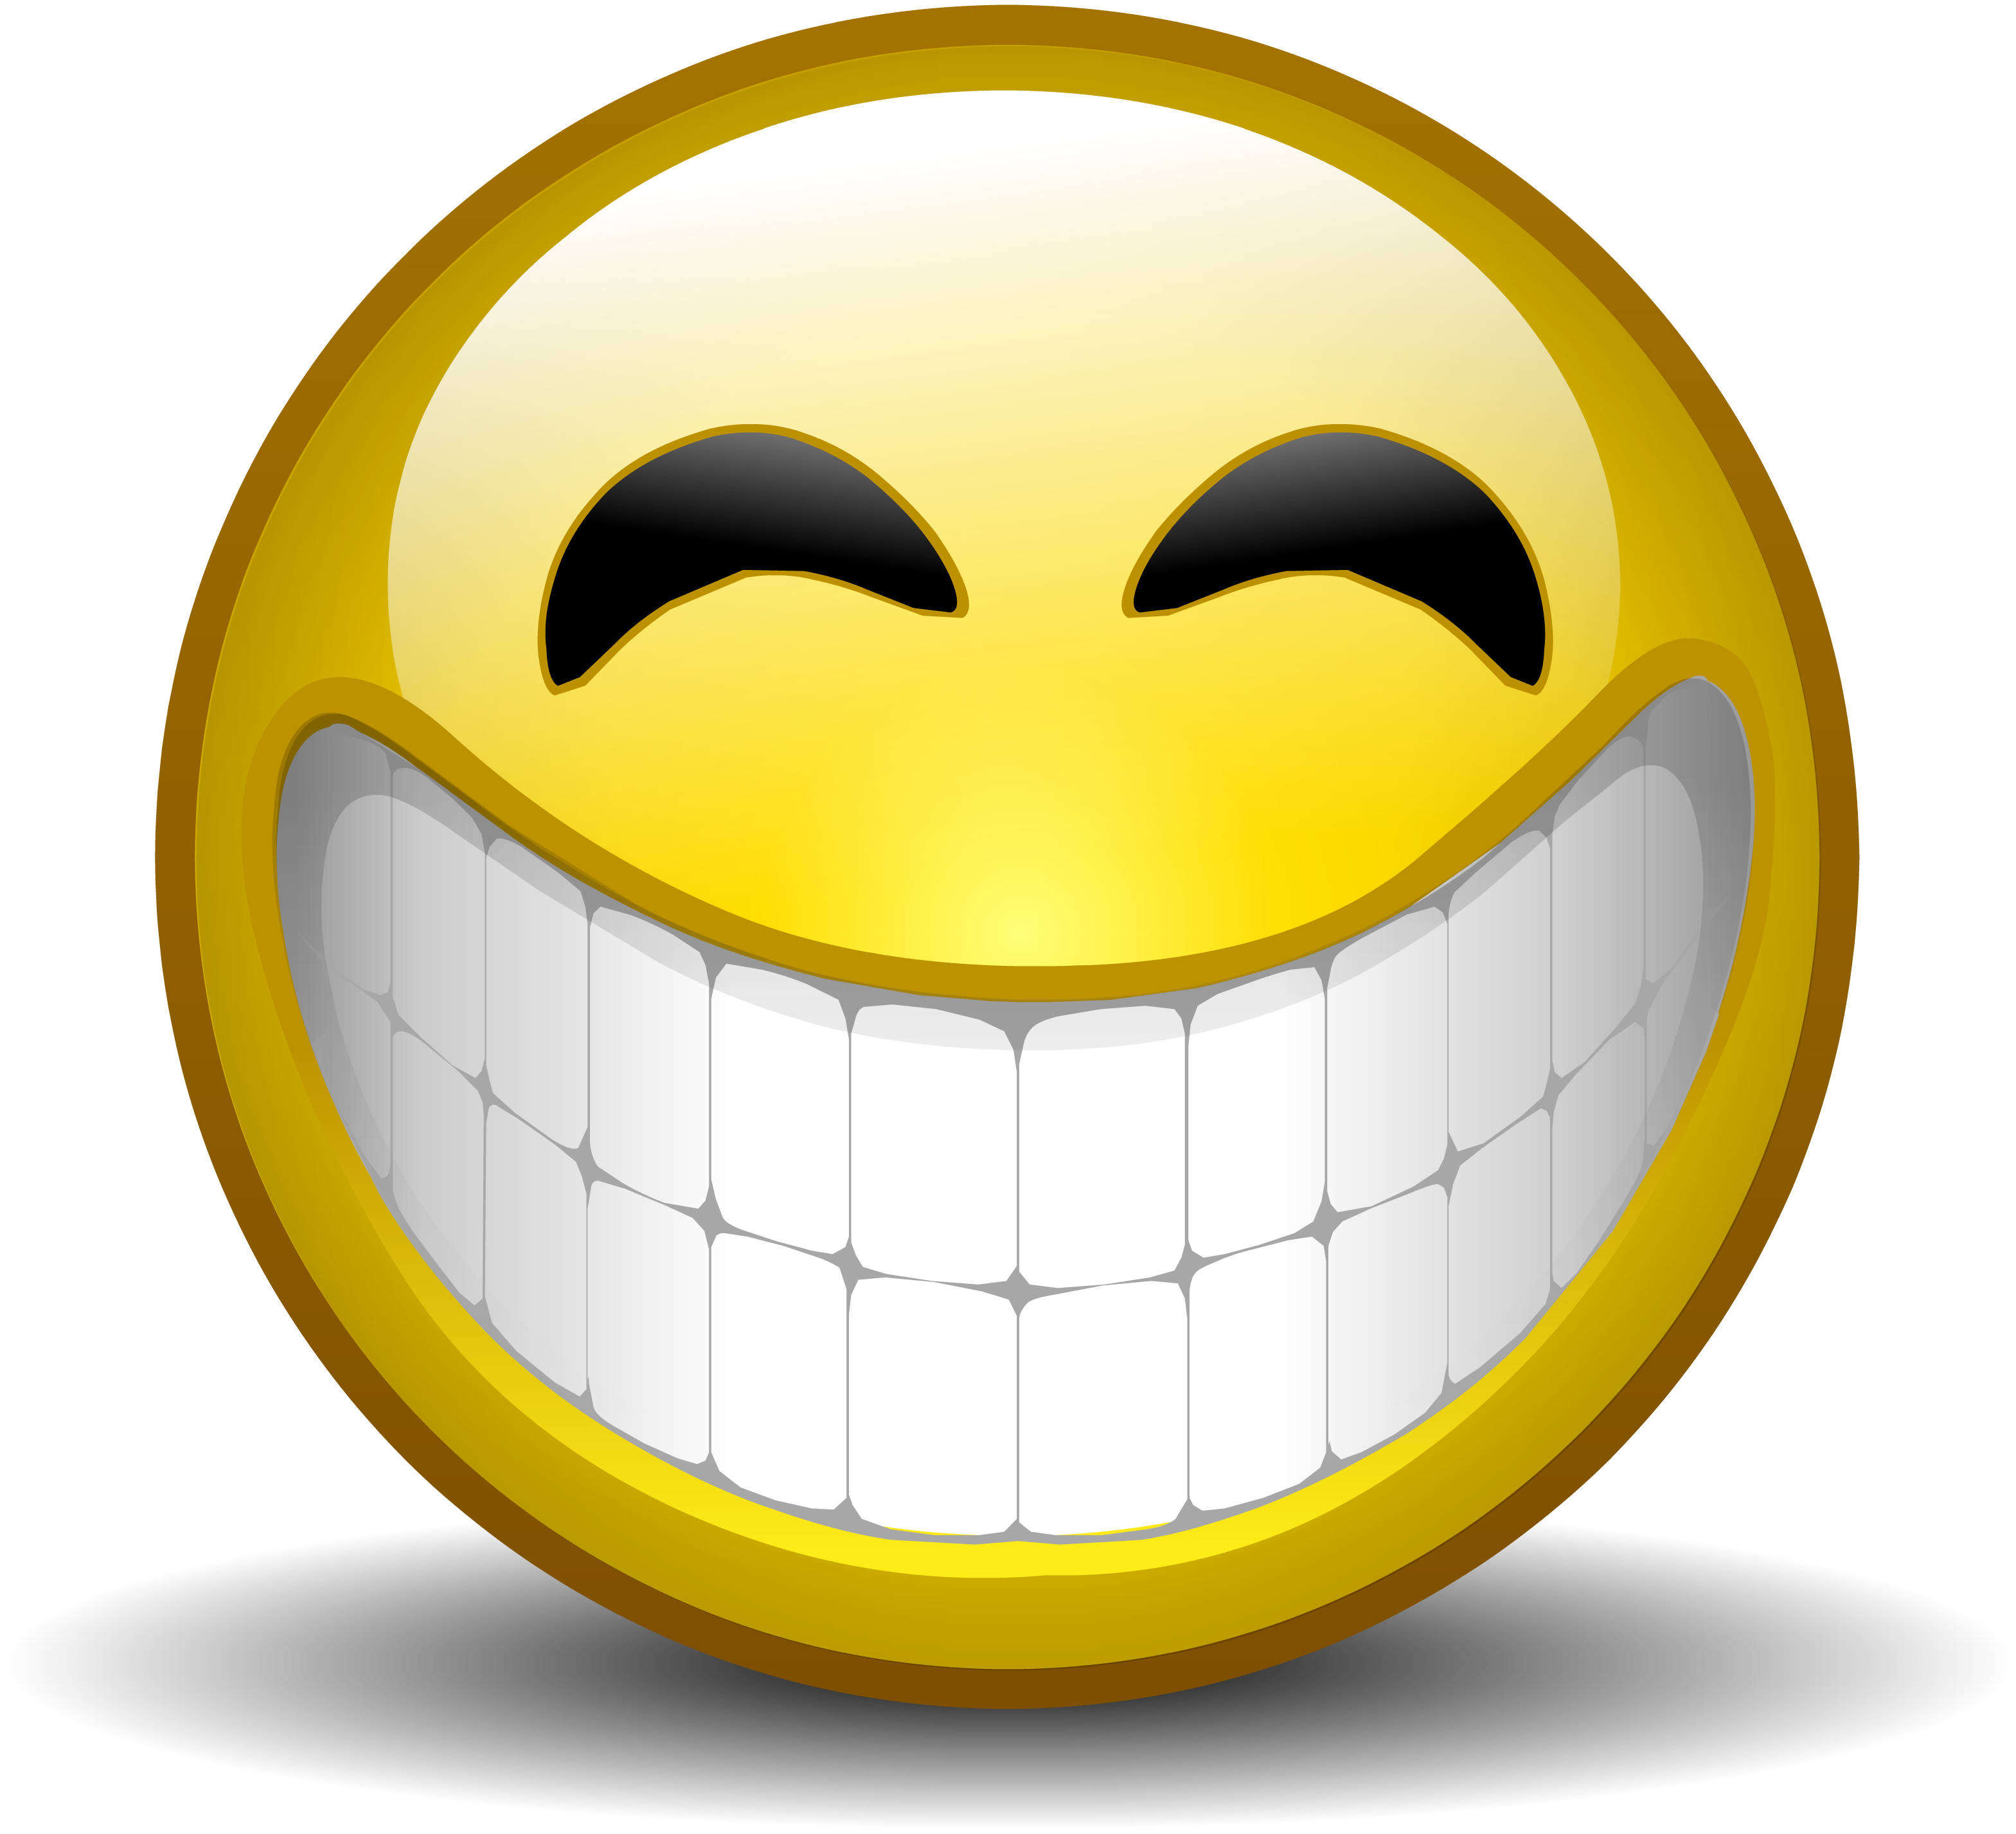 Smiley Image Free Download PNG HQ PNG Image